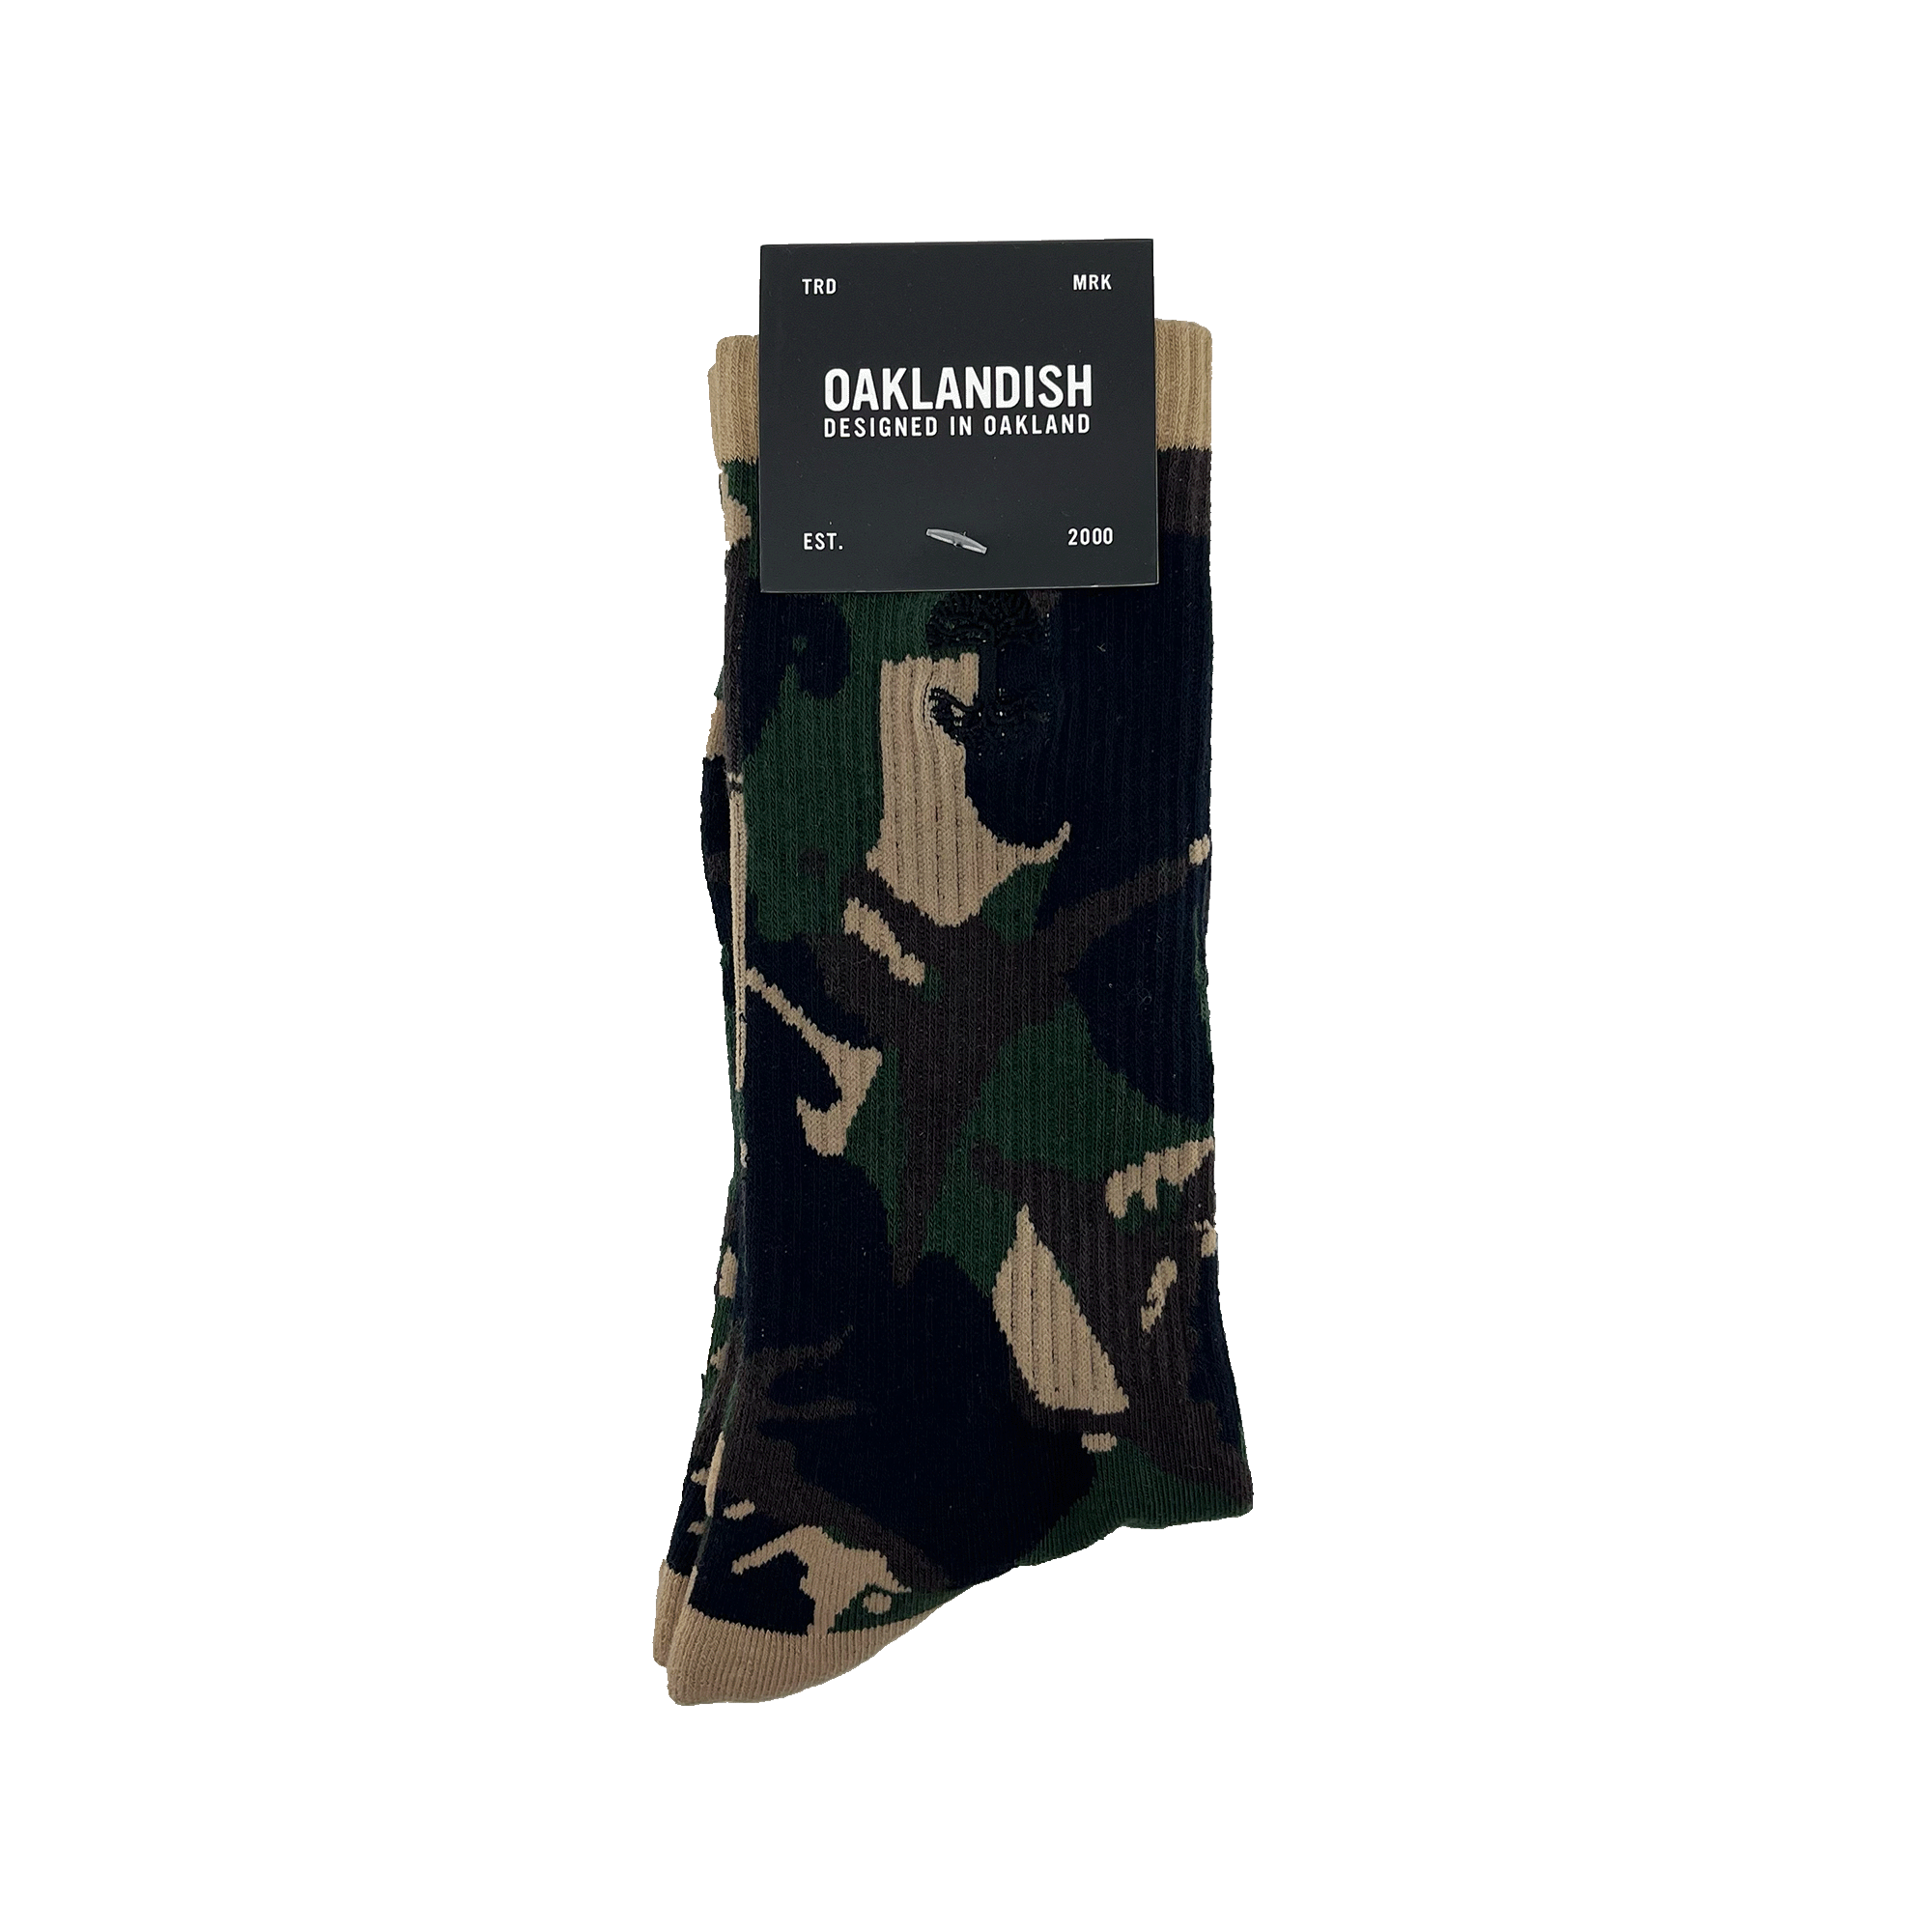 Pair folded camo crew socks in Oaklandish packaging with an embroidered black Oaklandish tree logo on the side.